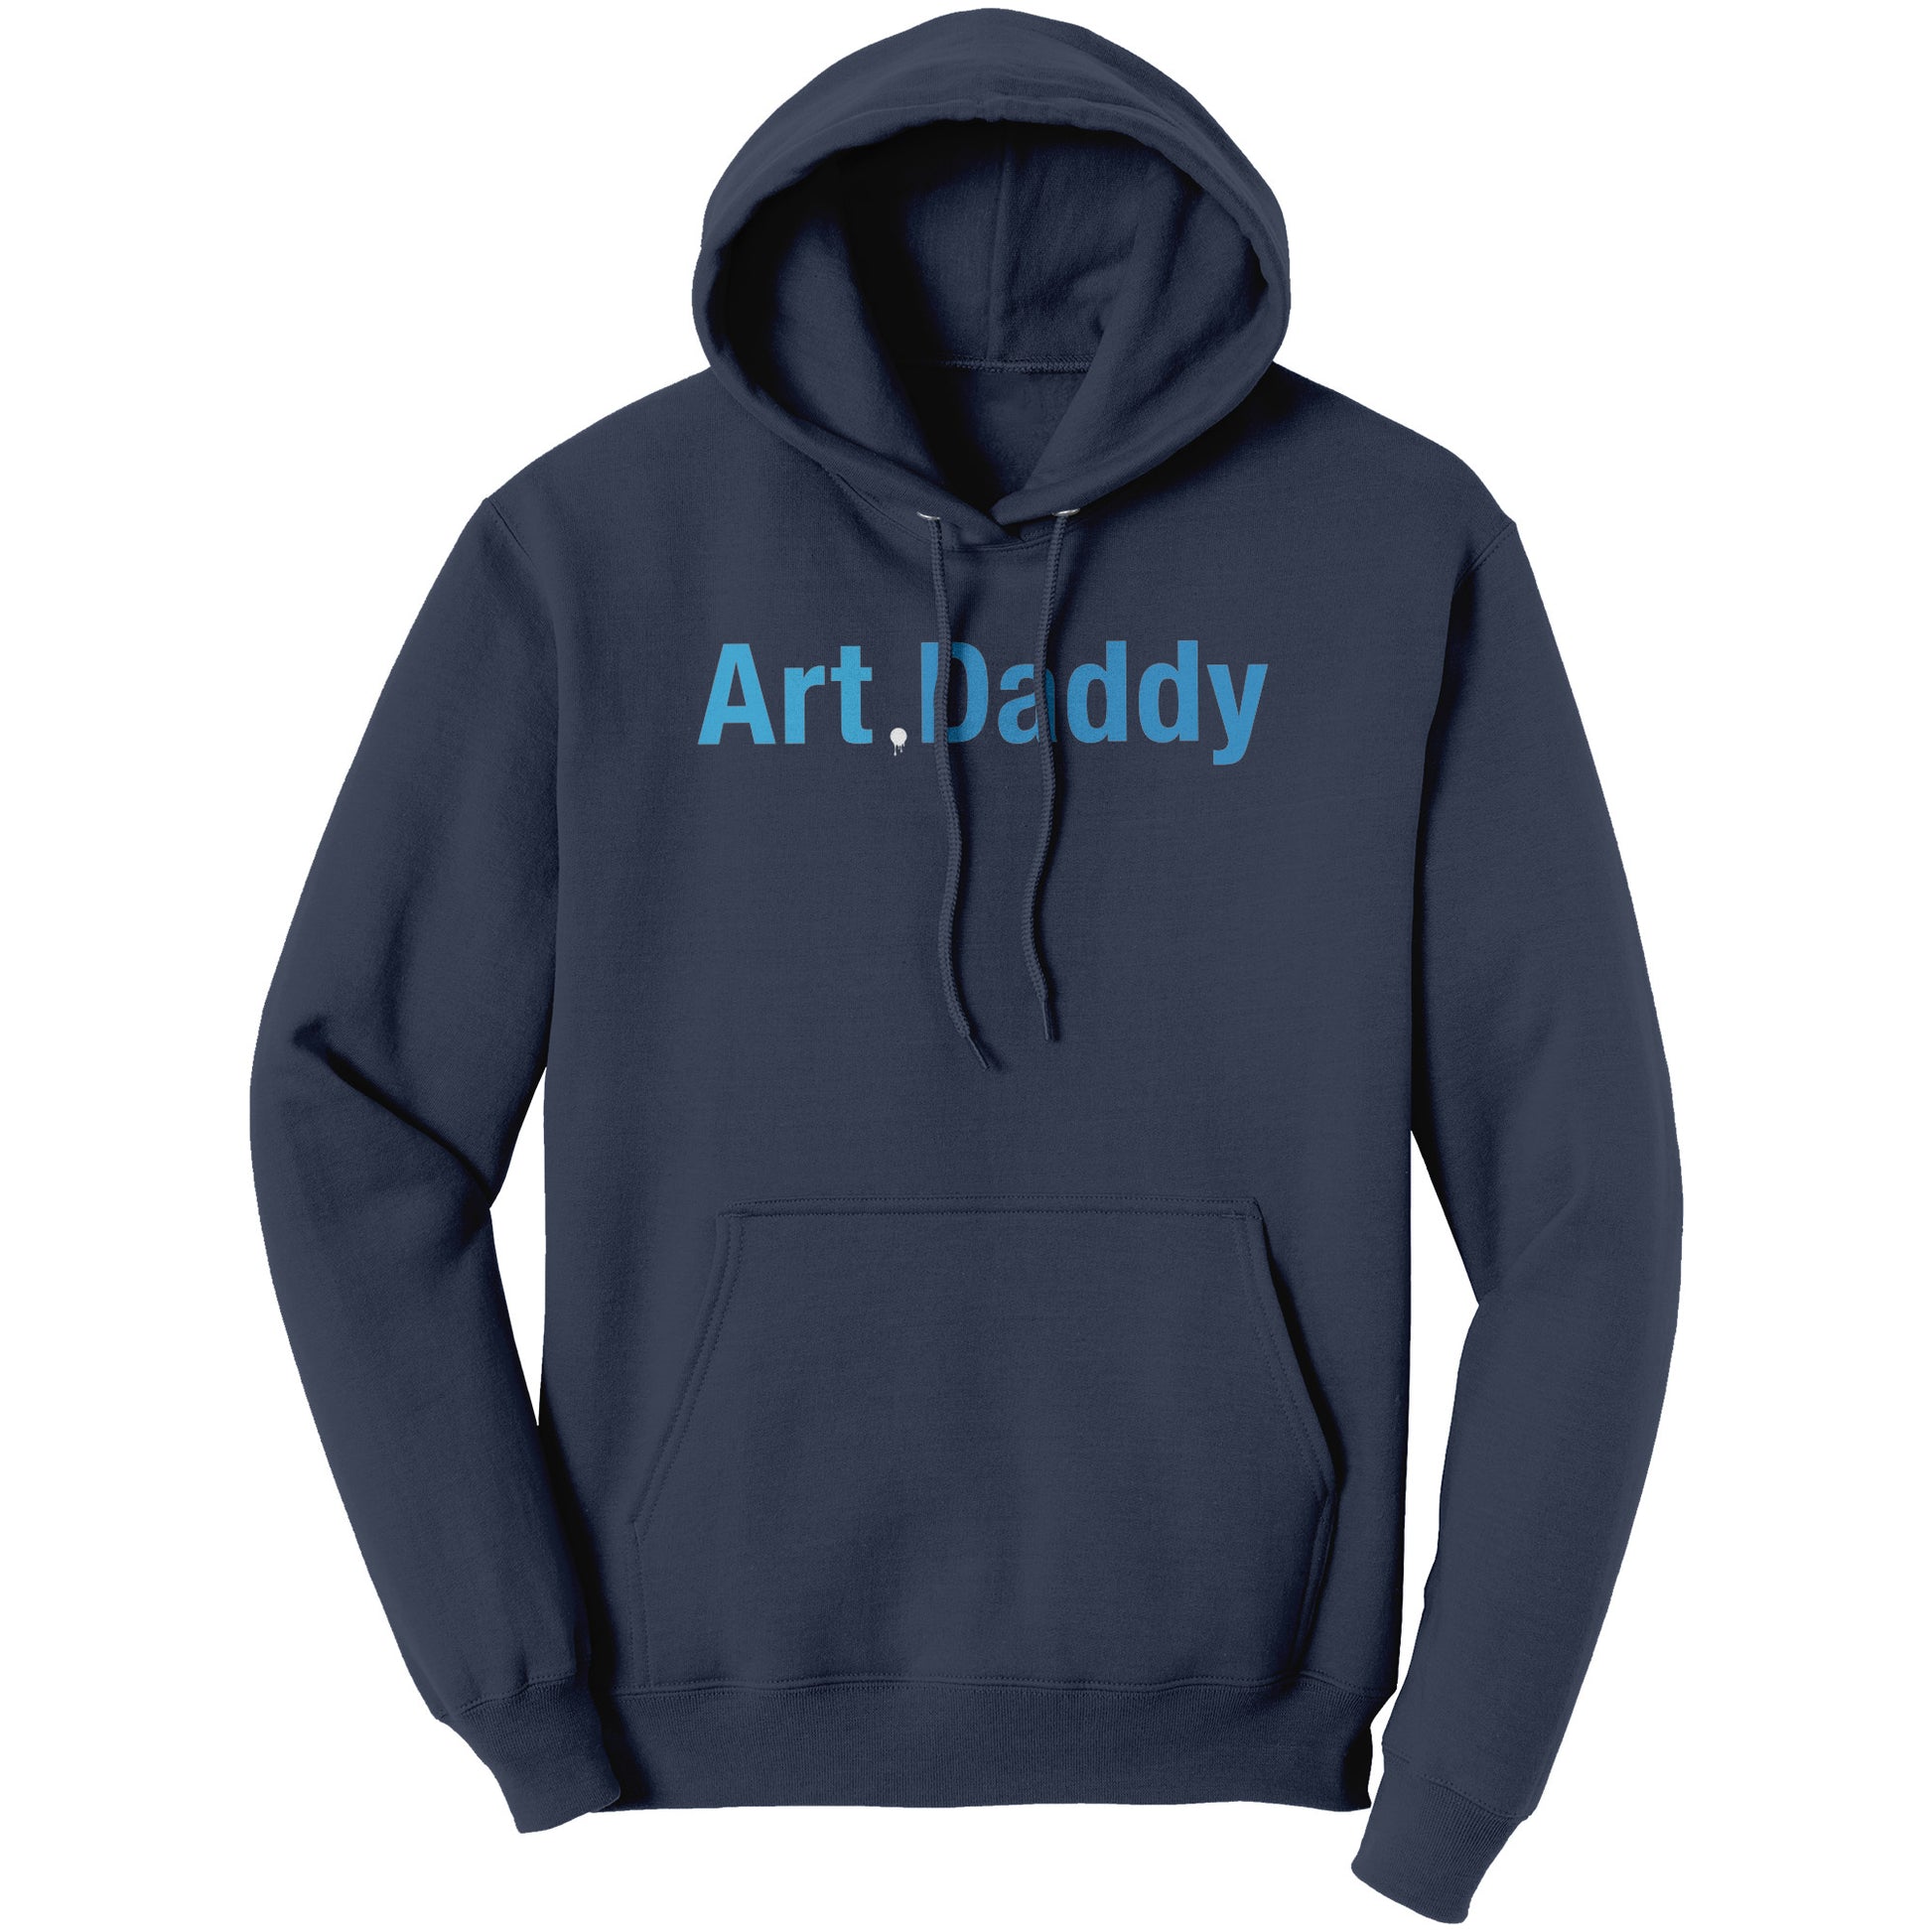 Art.Daddy hoodies and shirts from Michael Carini and Carini Arts